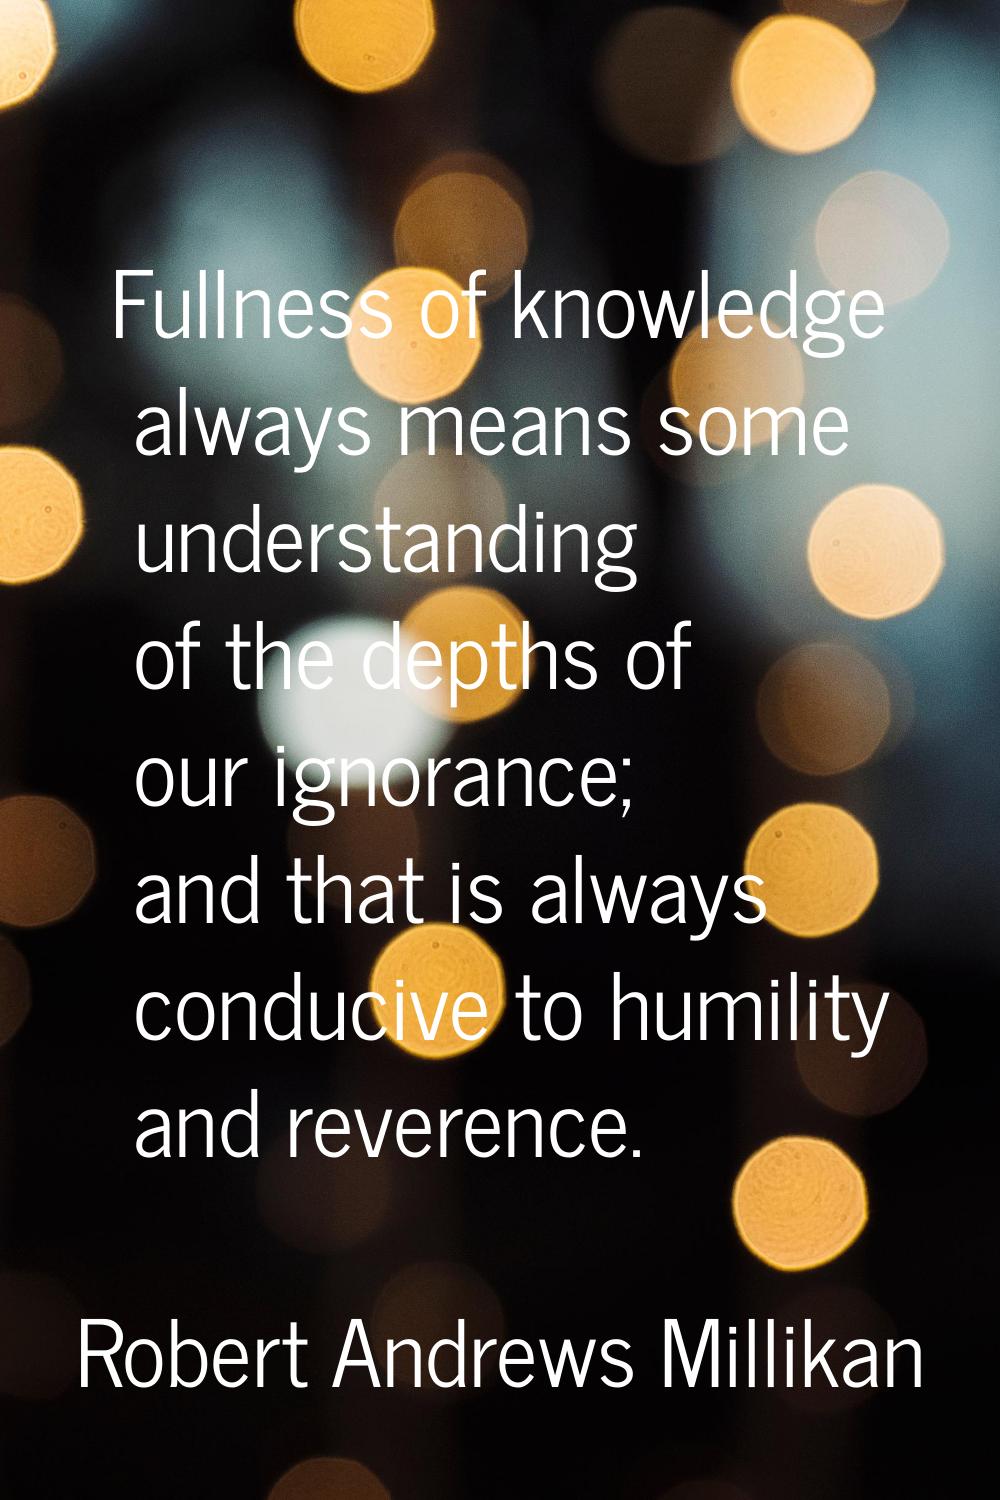 Fullness of knowledge always means some understanding of the depths of our ignorance; and that is a